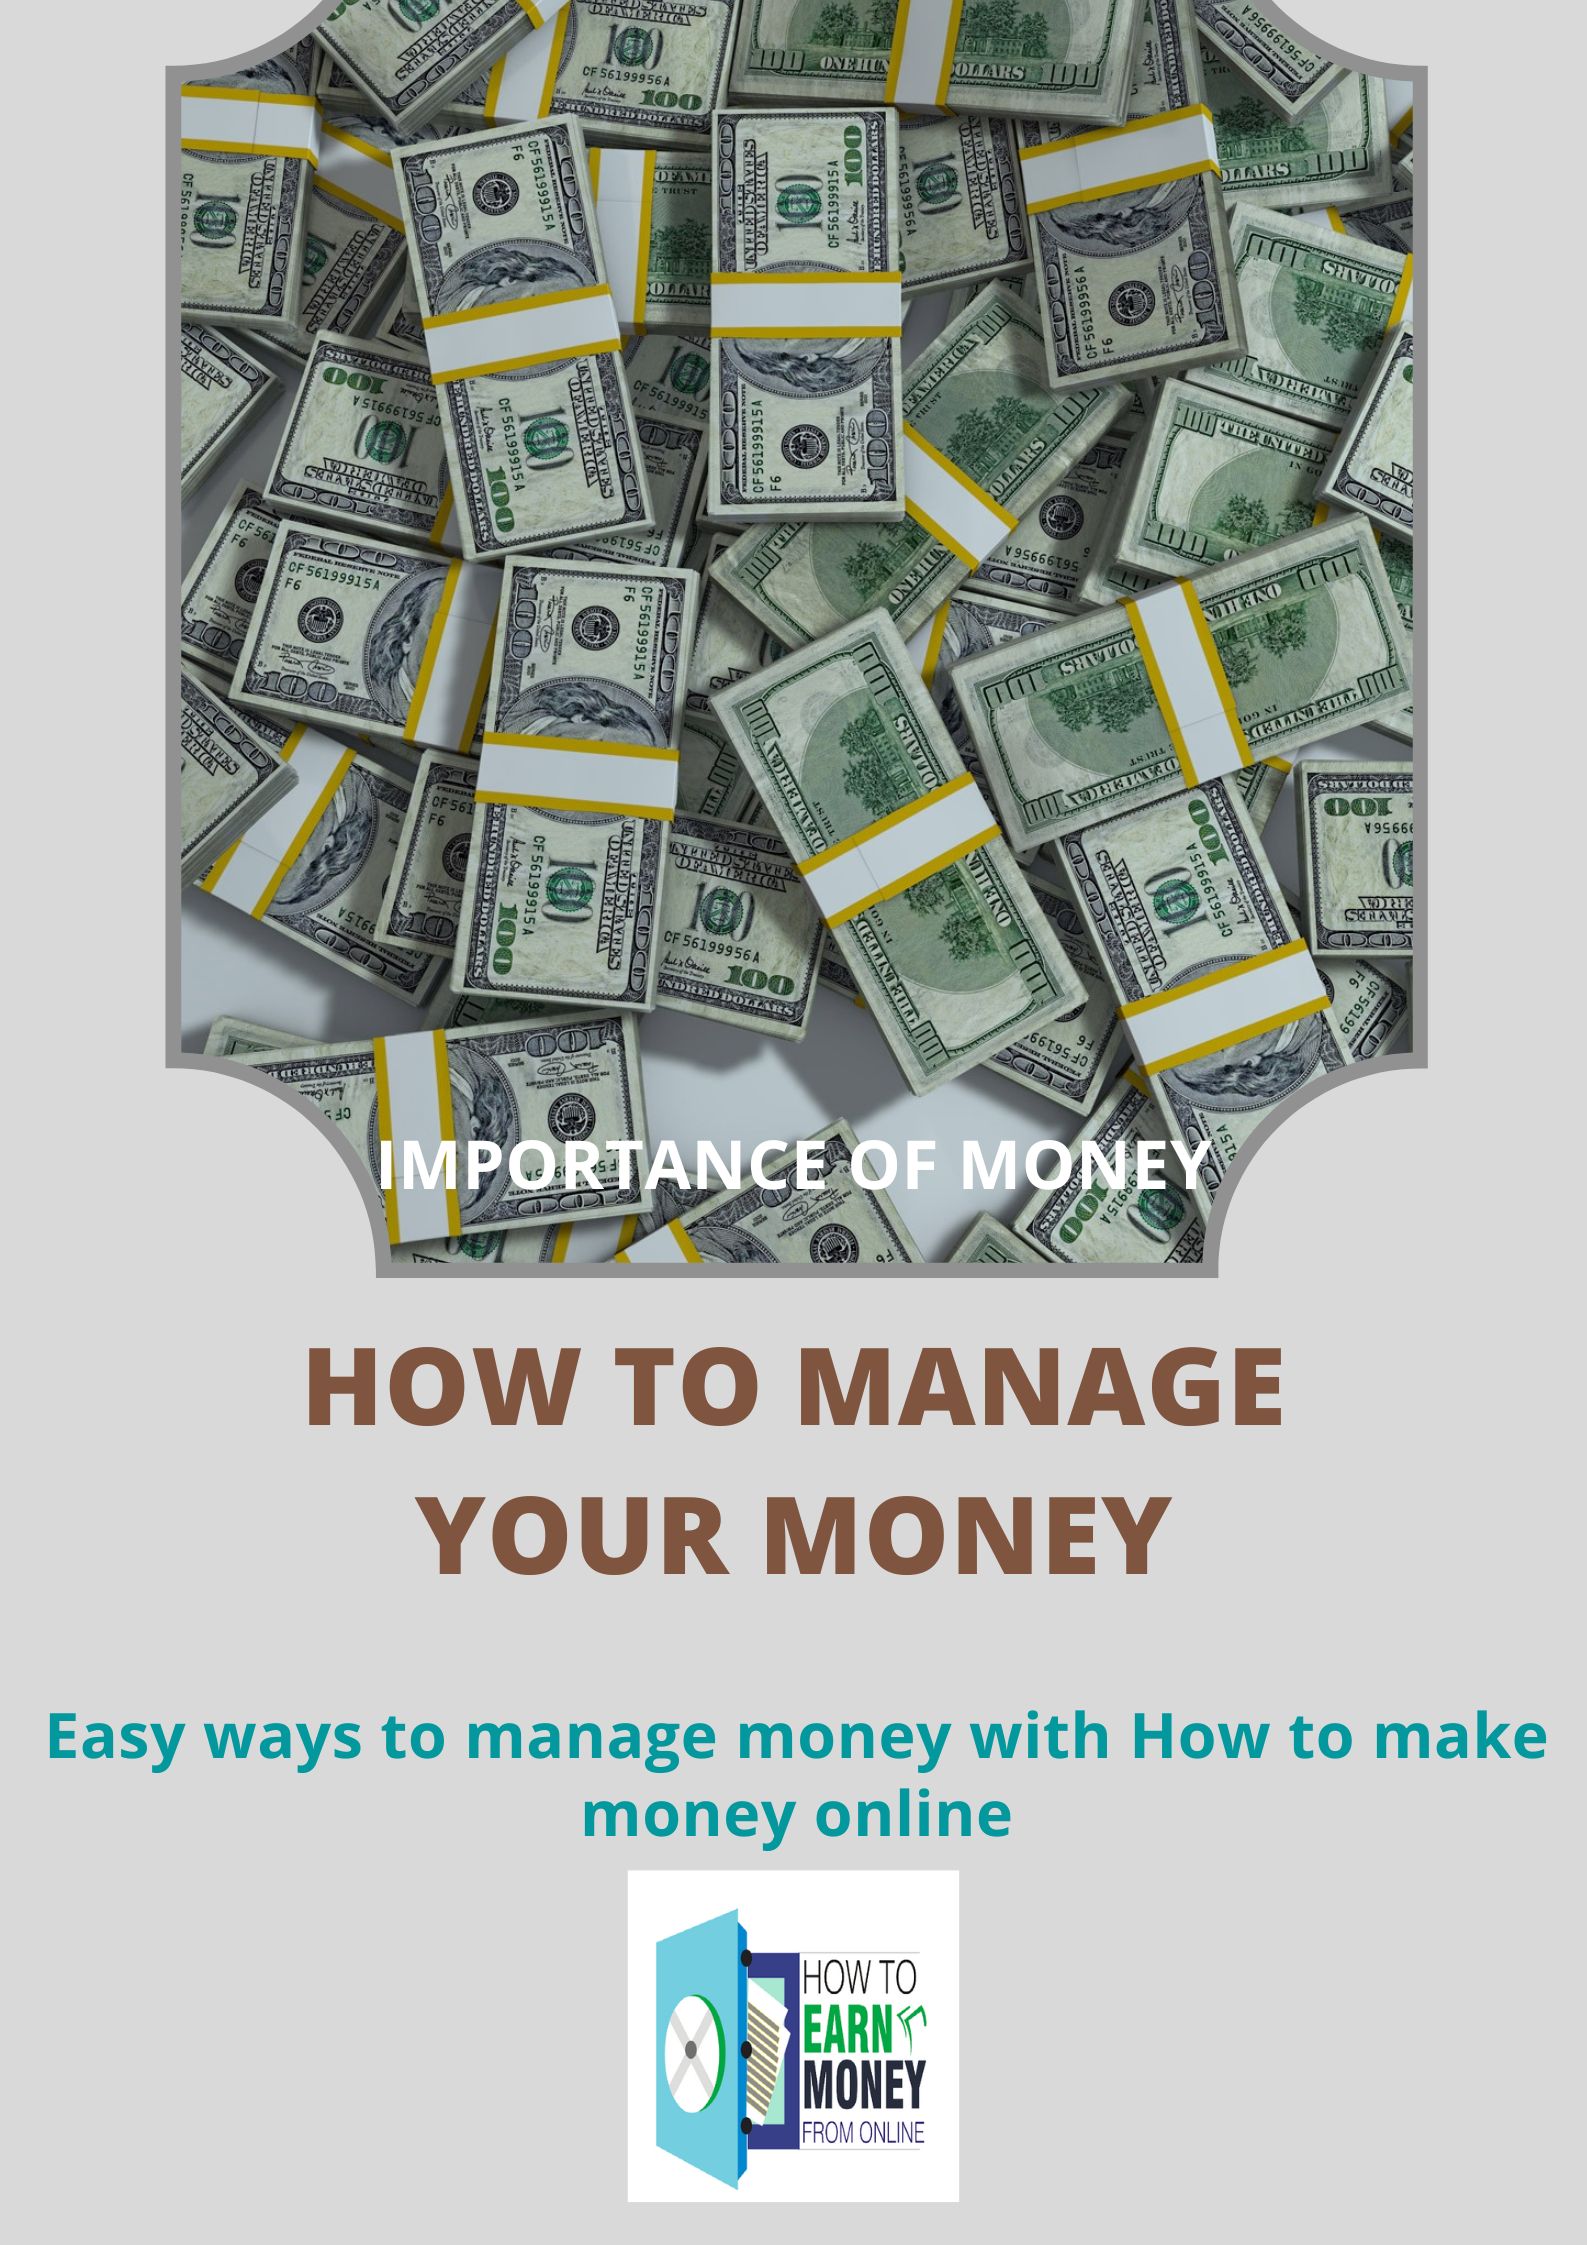 Importance (How to manage your money)